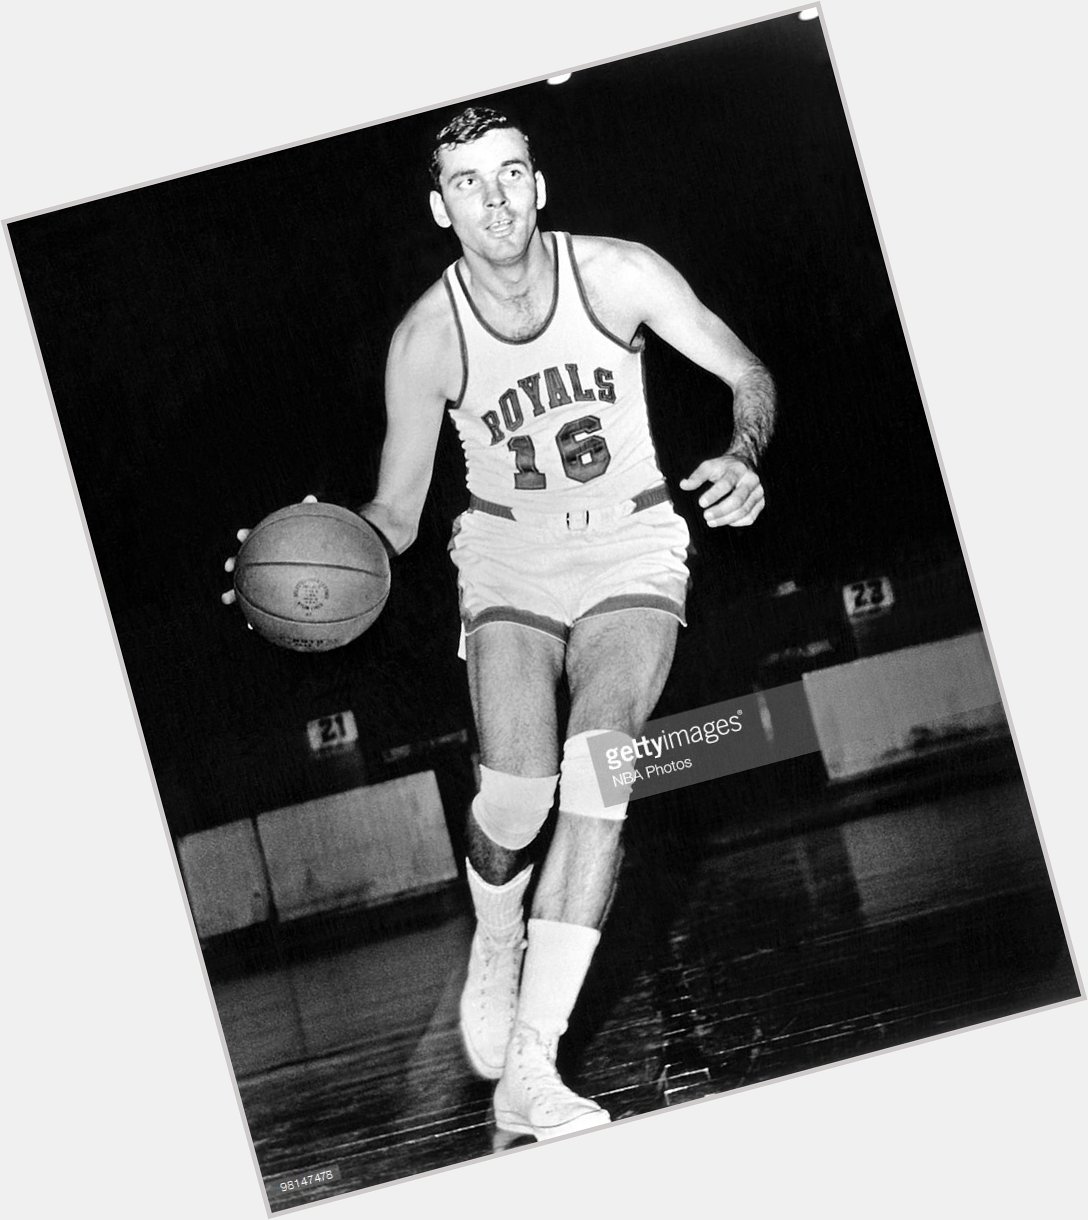 Happy Birthday to Jerry Lucas, who turns 77 today! 